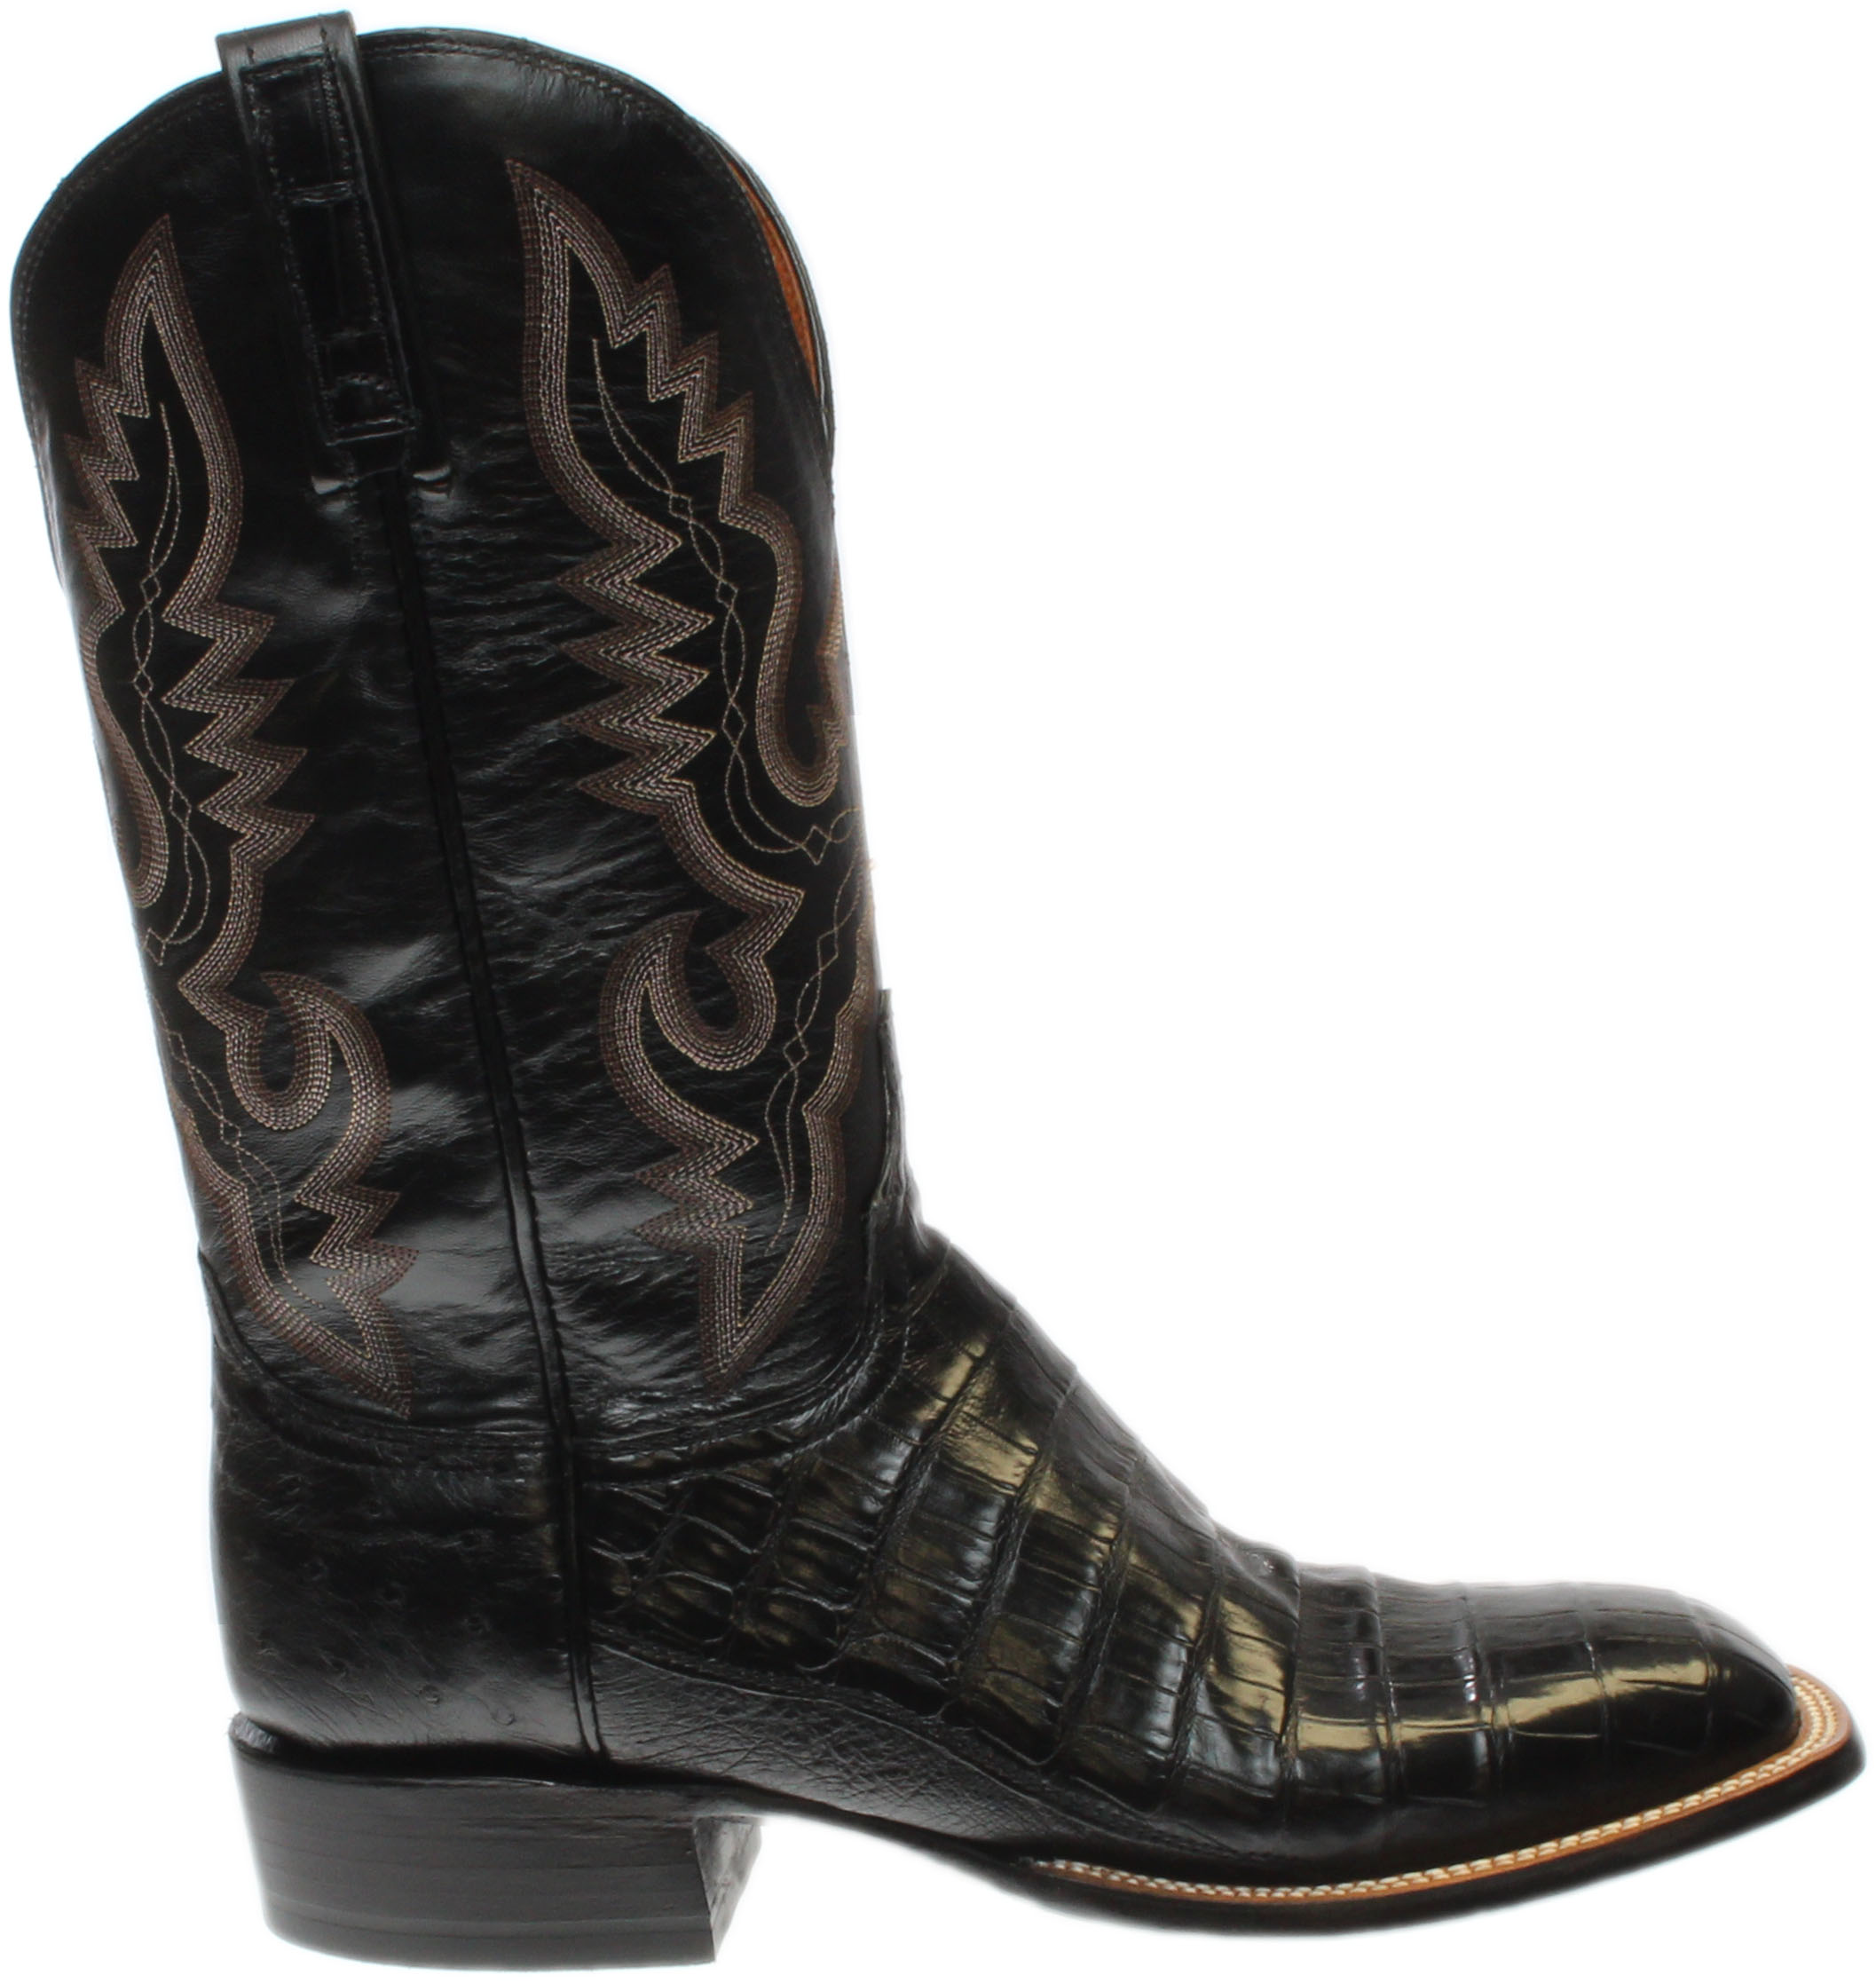 Lucchese Trent Mad Dog Goat and Caiman Leather Boots